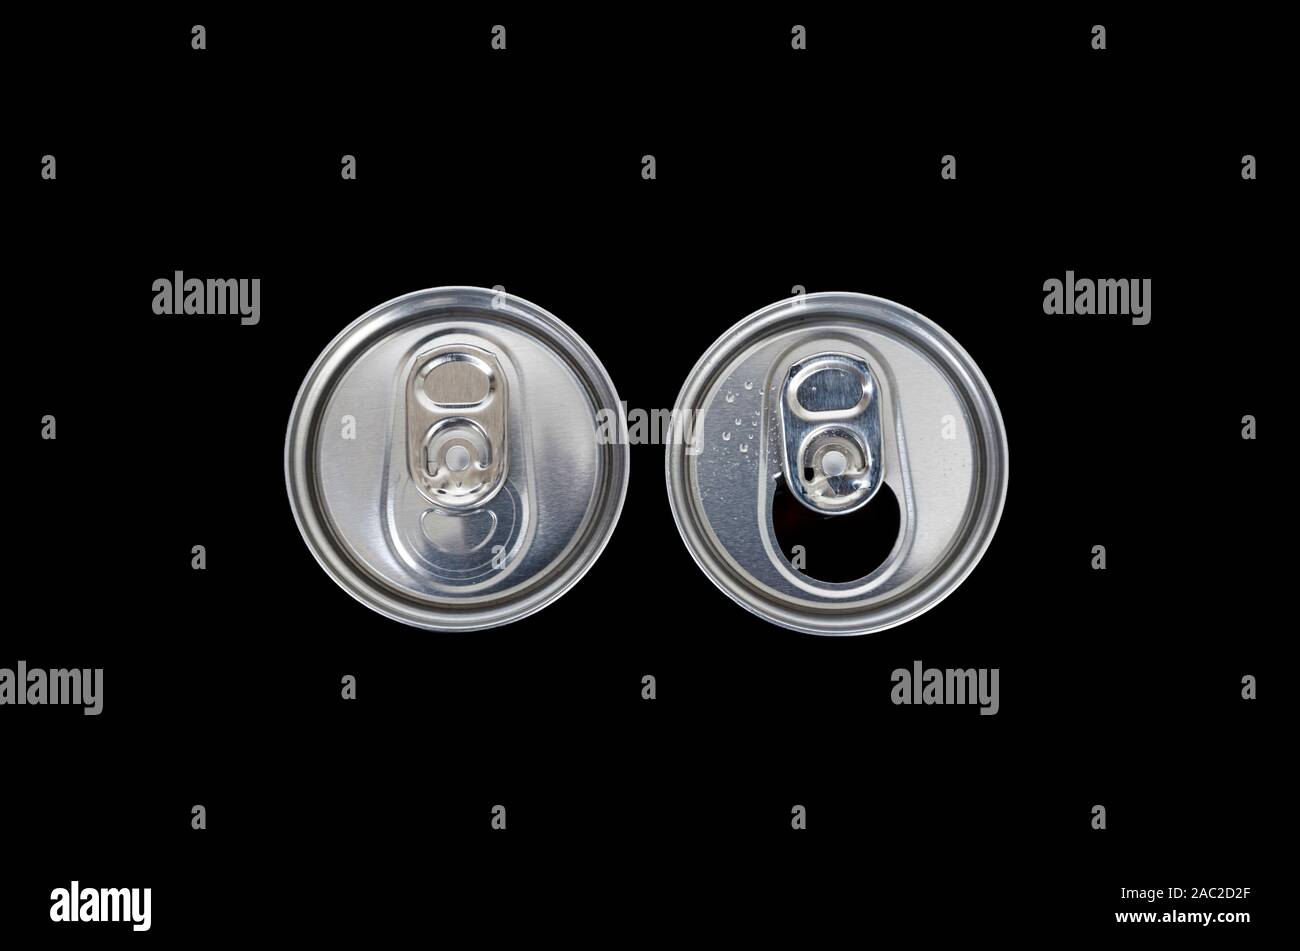 Cans. Top view of an unopened and opened metal can on dark background. Stock Photo